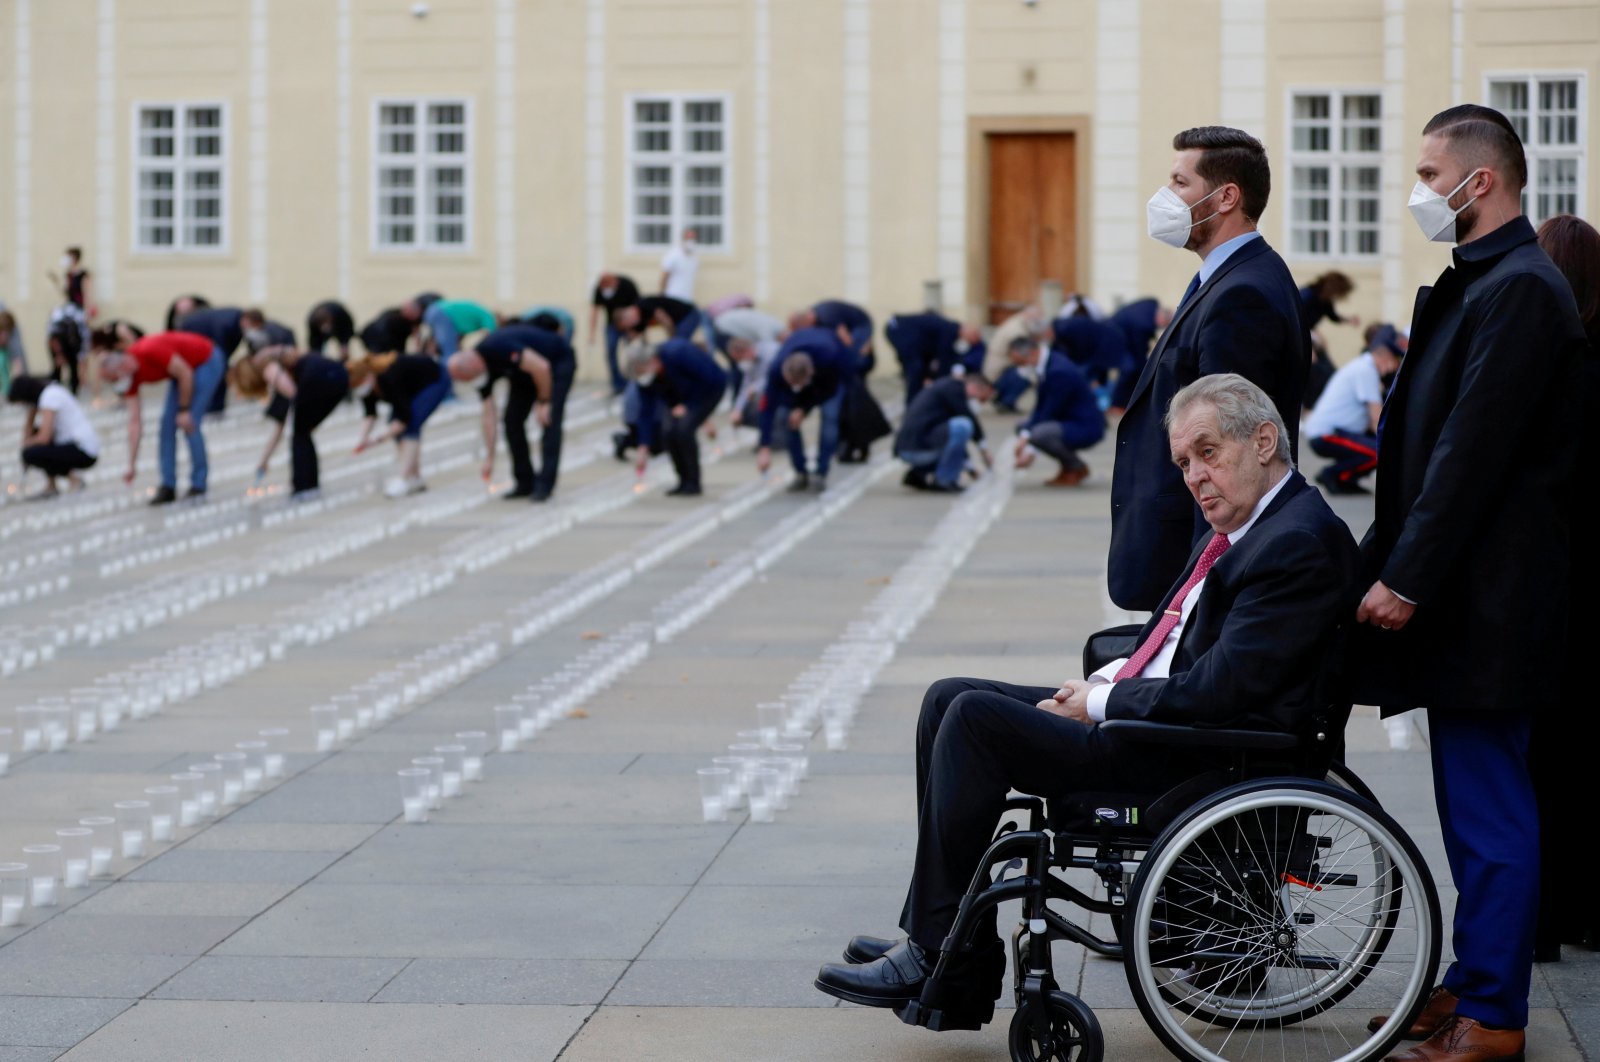 Czech President Milos Zeman watches as employees of Prague Castle light candles to commemorate the victims of the COVID-19 pandemic at Prague Castle in Prague, Czech Republic, May 10, 2021. (Reuters Photo)